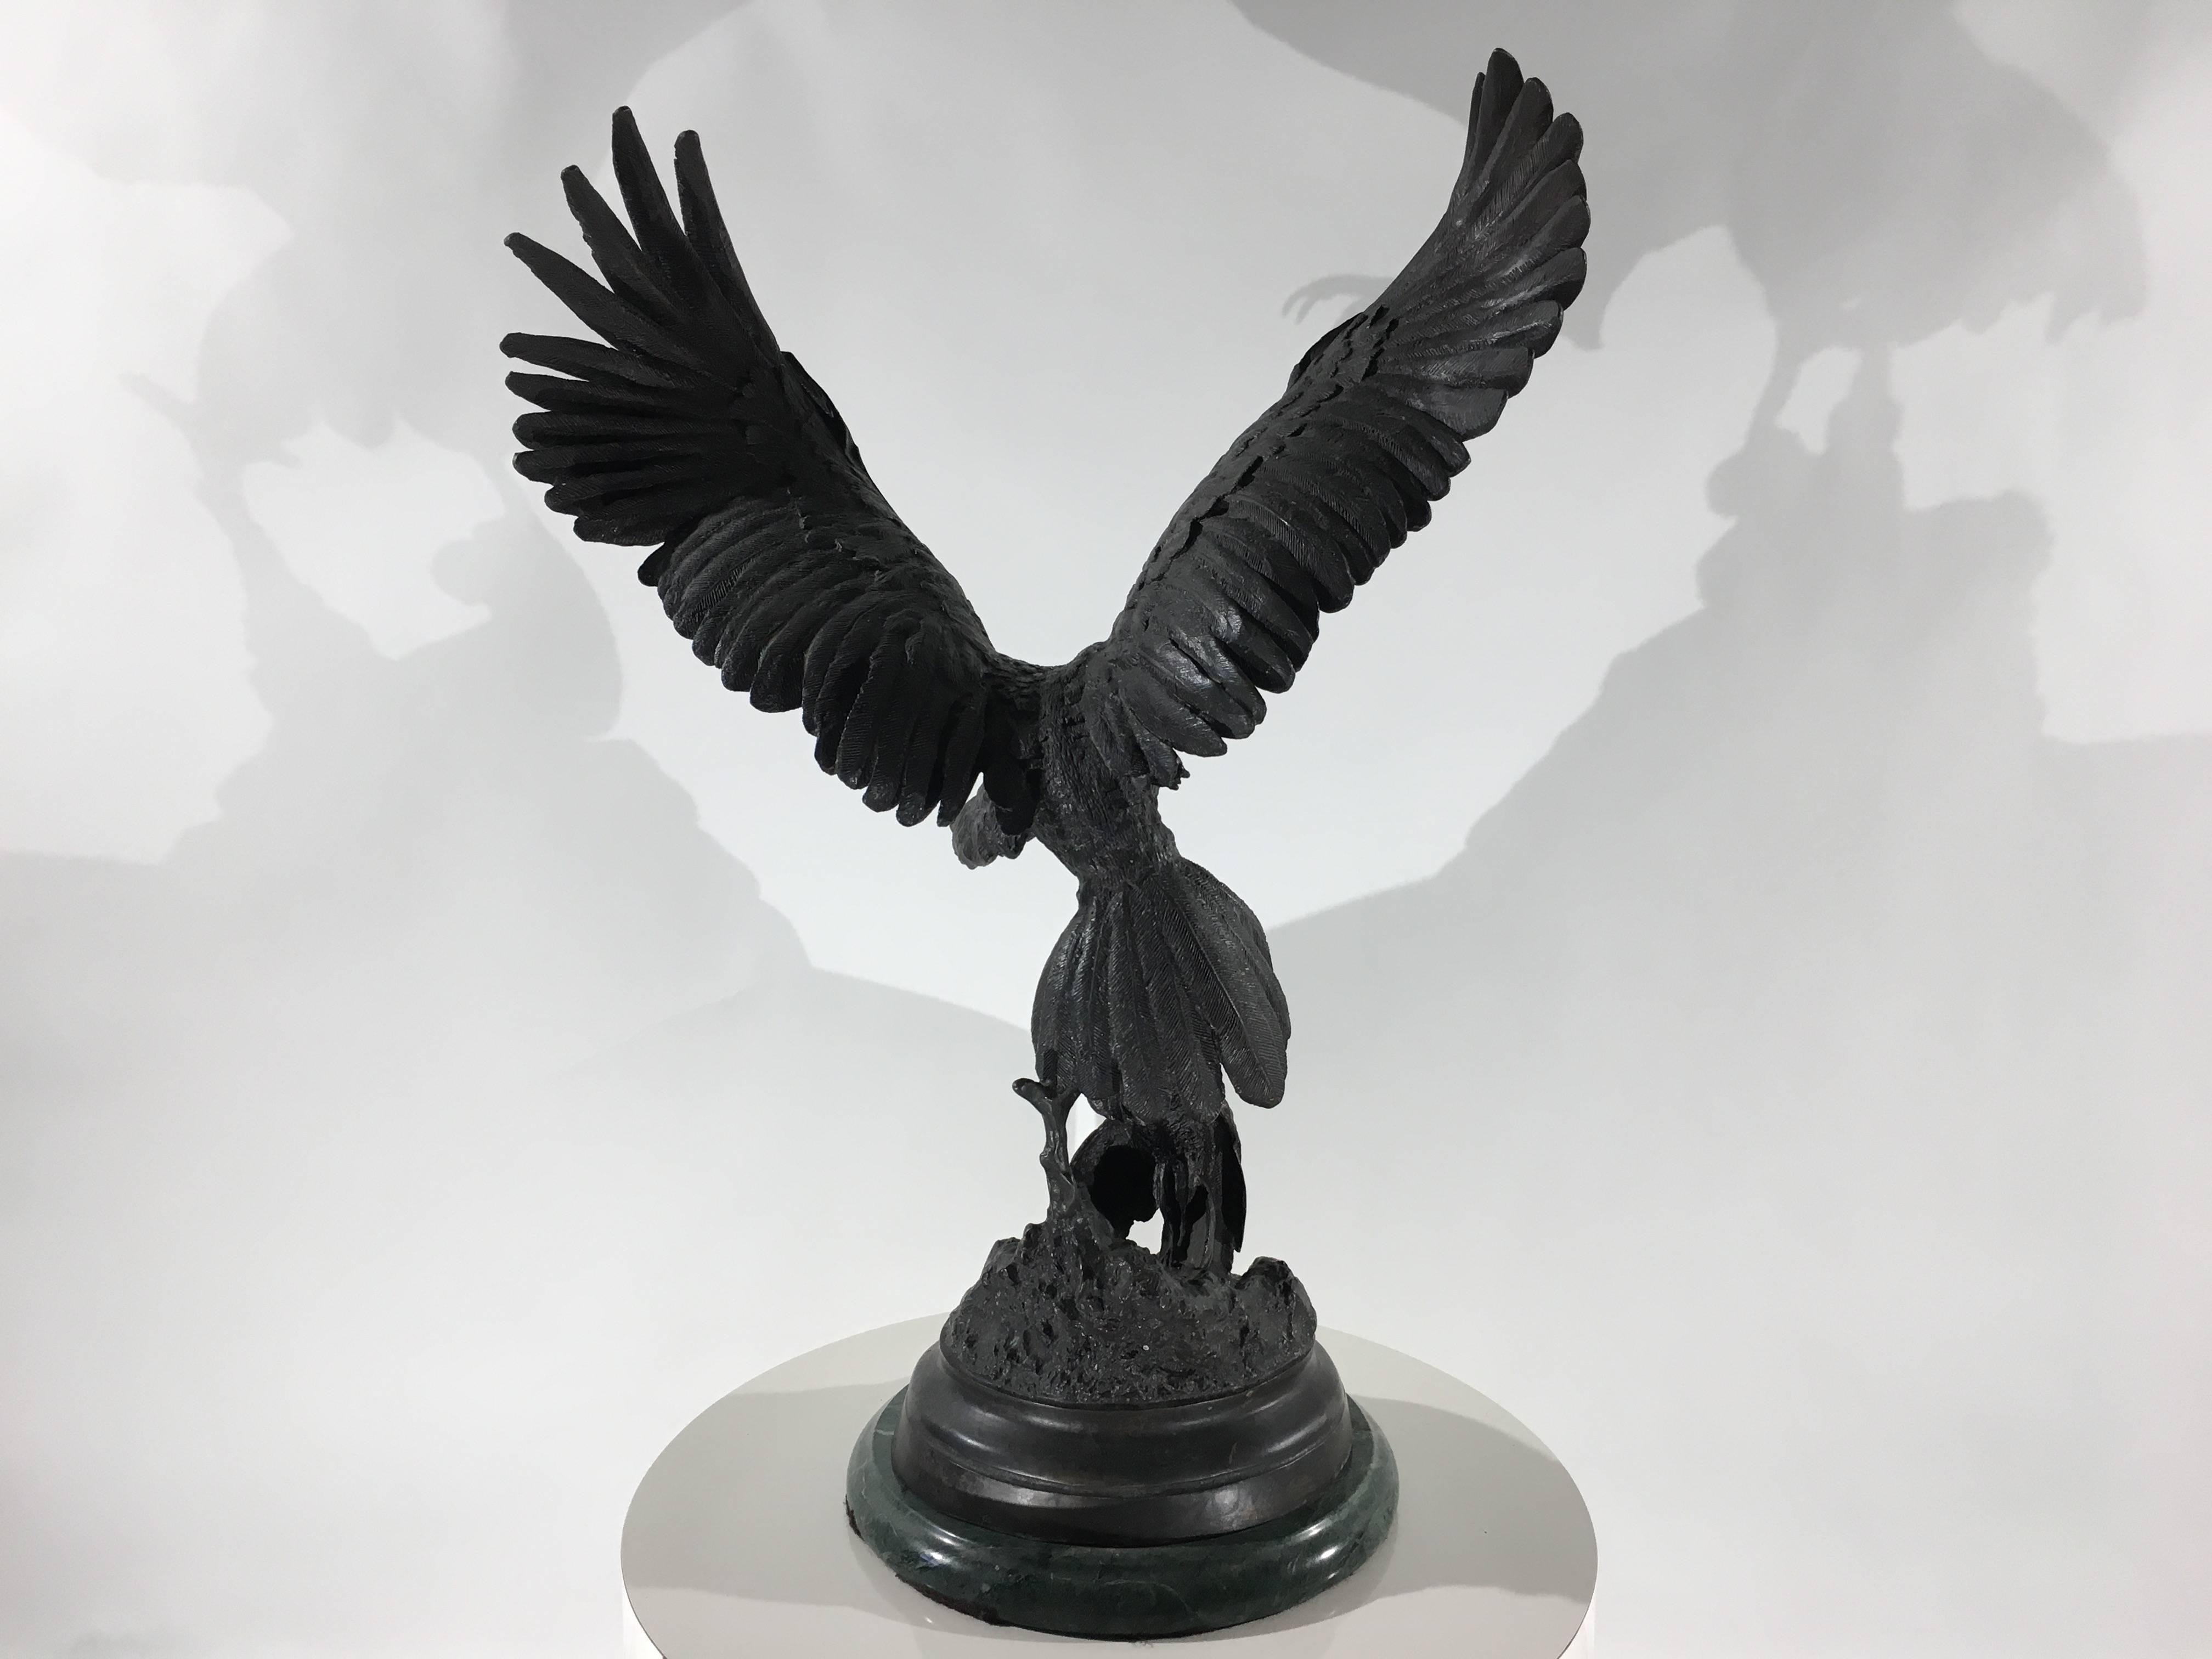 Jules Moigniez (1835-1894) was a French artist especially known for his highly-detailed sculptures of birds. This bronze depicts a falcon at the moment of capturing its prey. The falcon’s wings are extended, one talon grasping the small bird, with